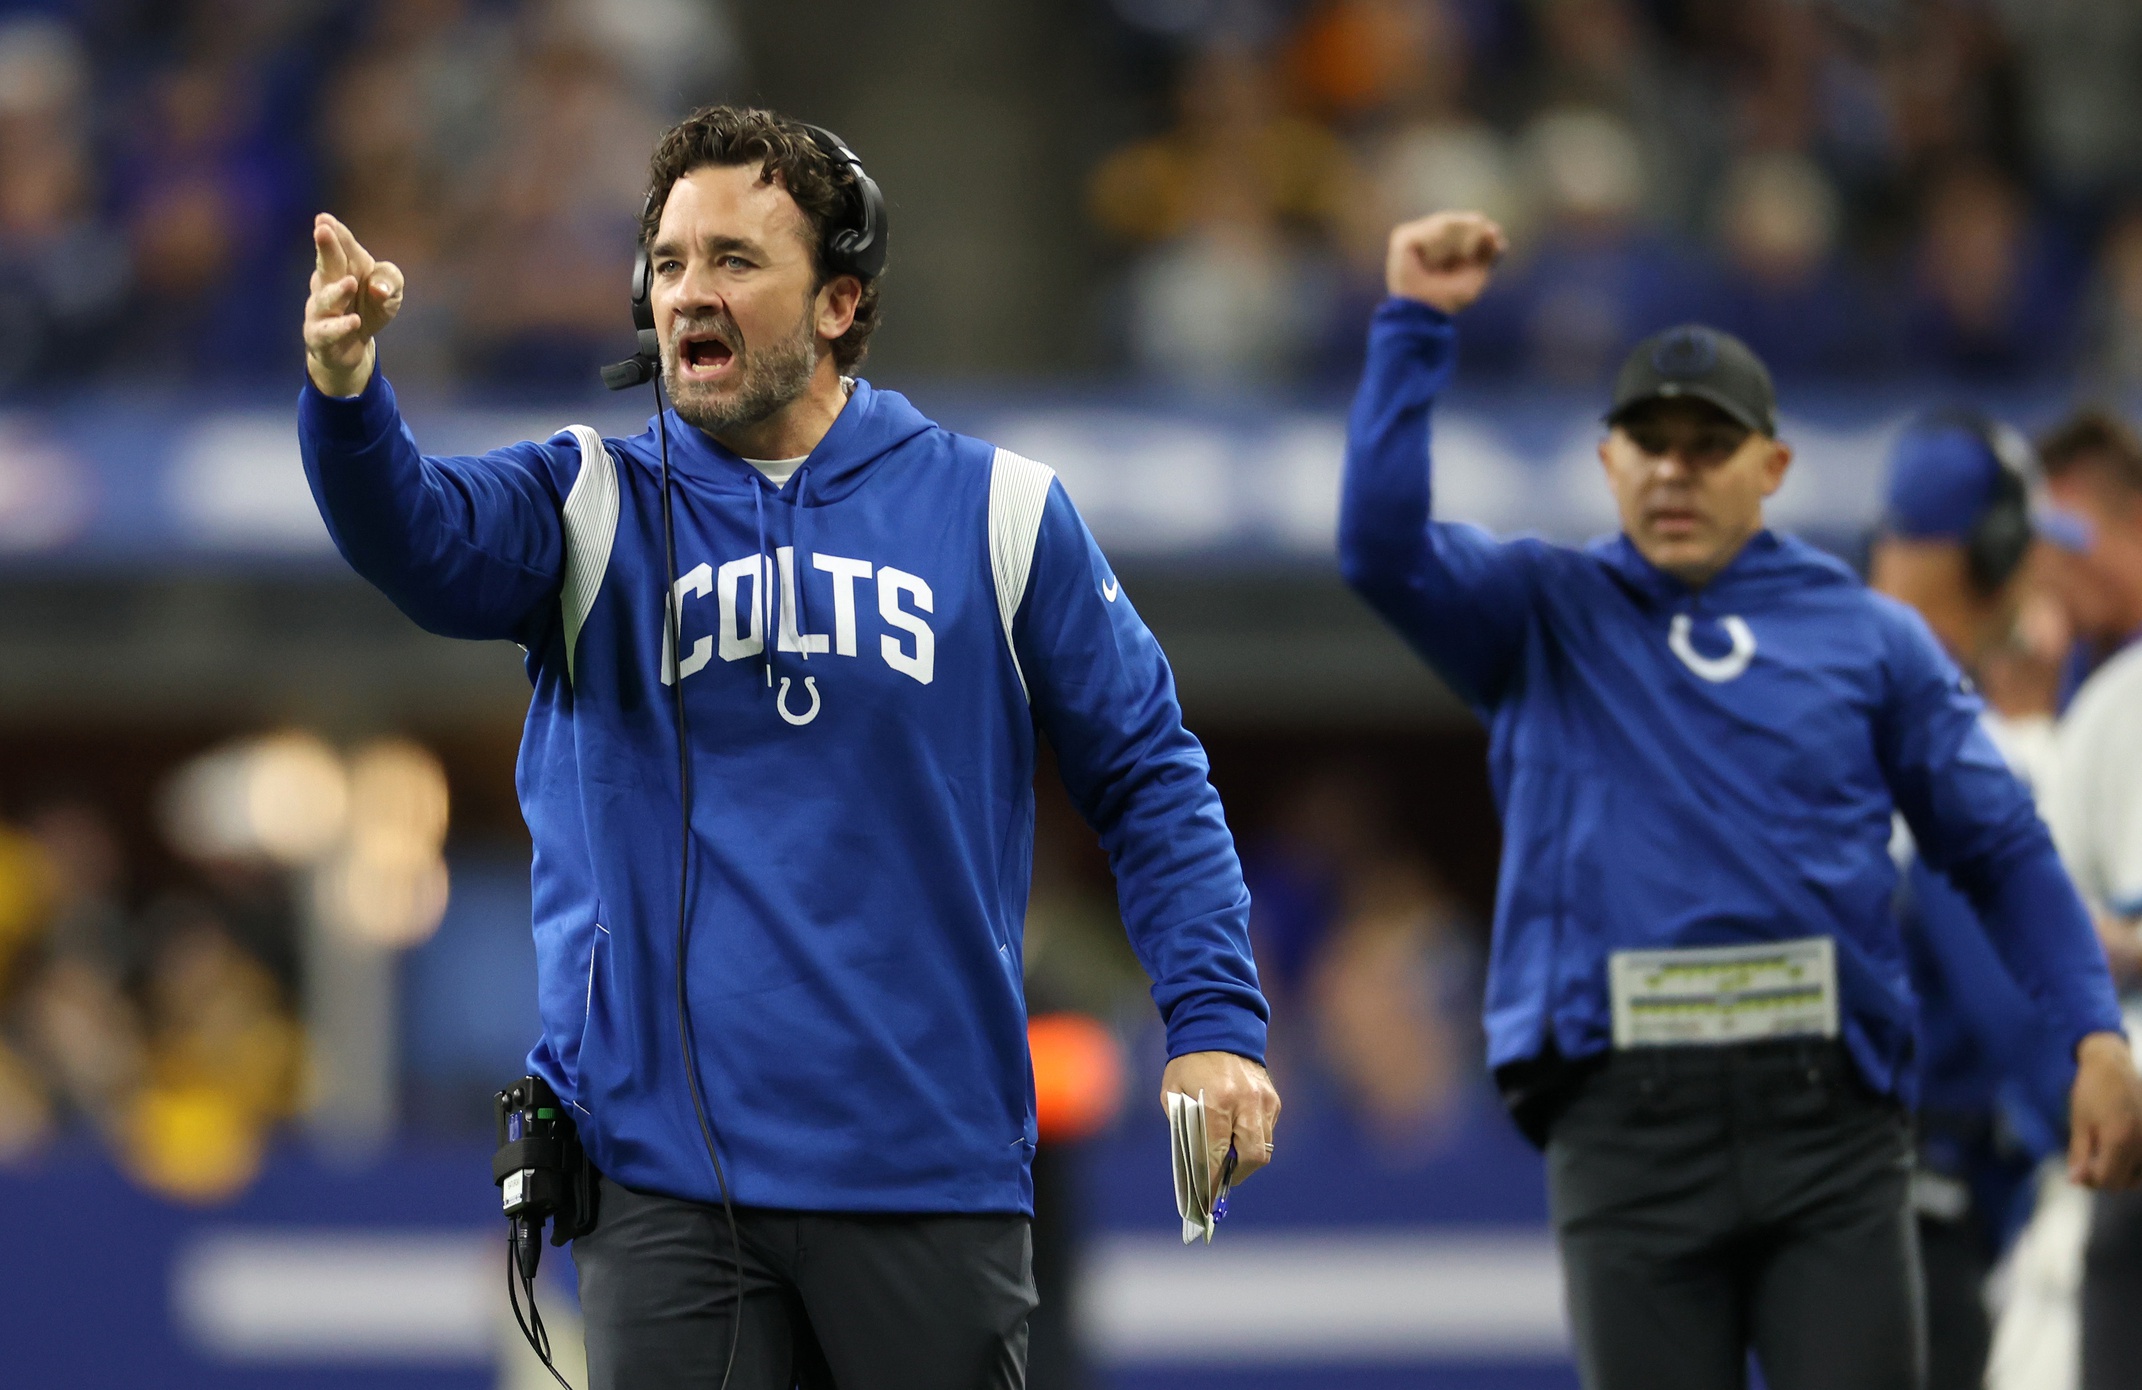 Colts, Cardinals 2023 NFL Rebuilds Start With Head Coaches, General Managers